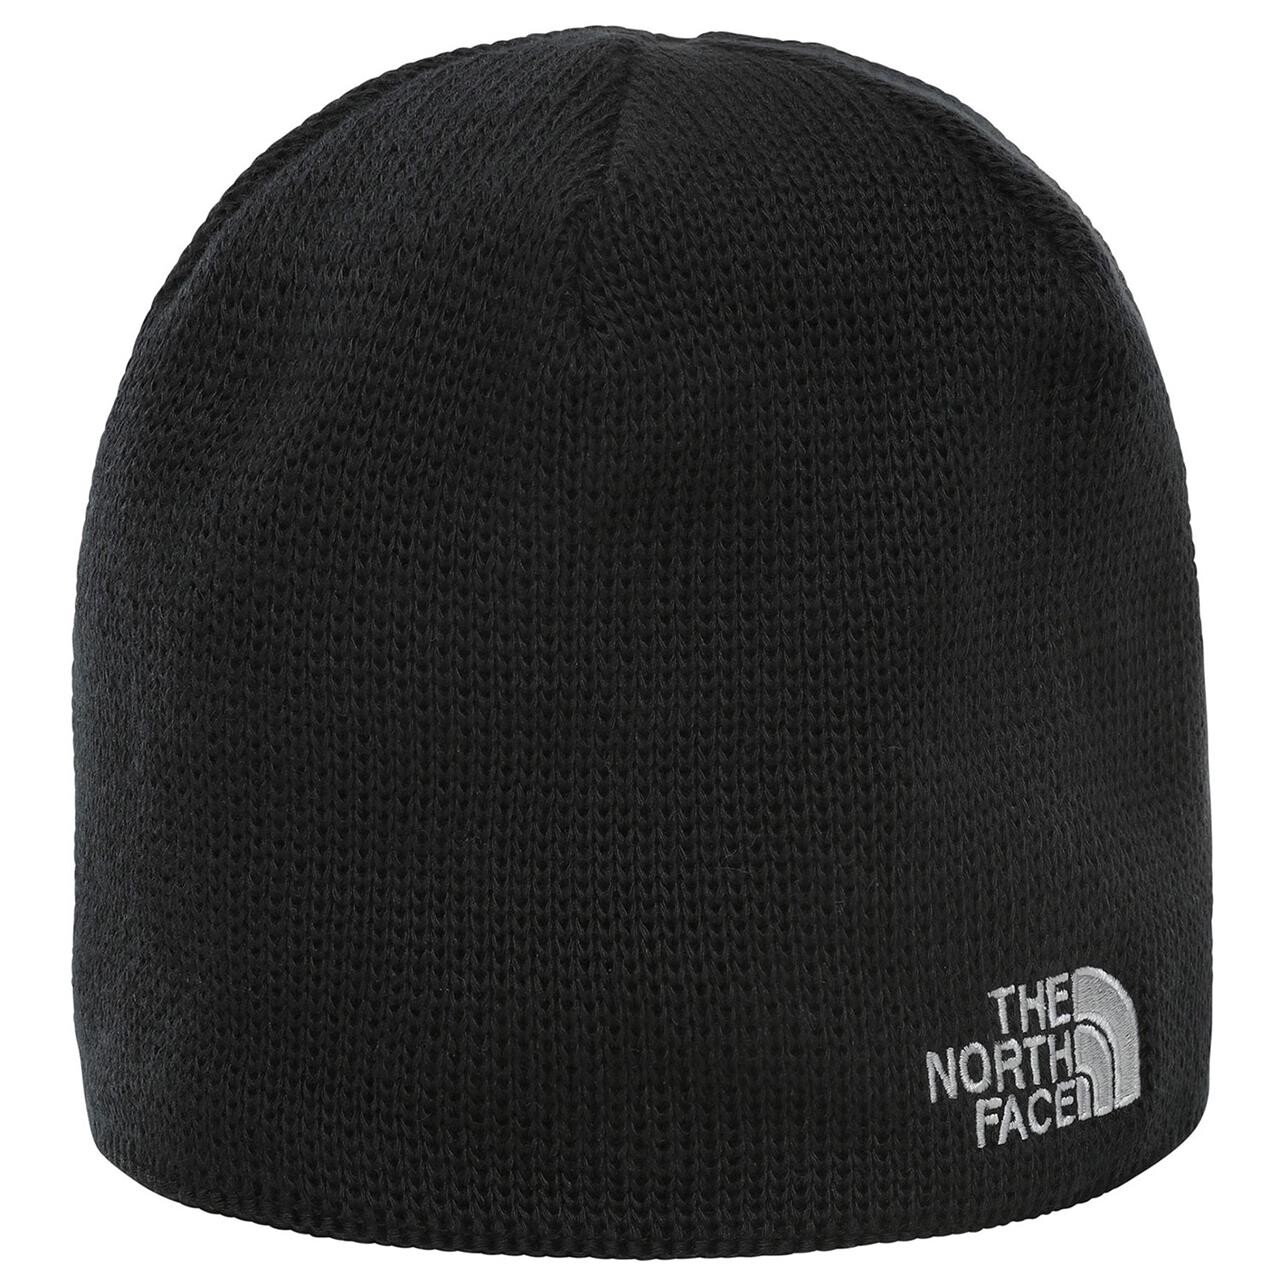 4: The North Face Bones Recycled Beanie (Sort (TNF BLACK) One size)